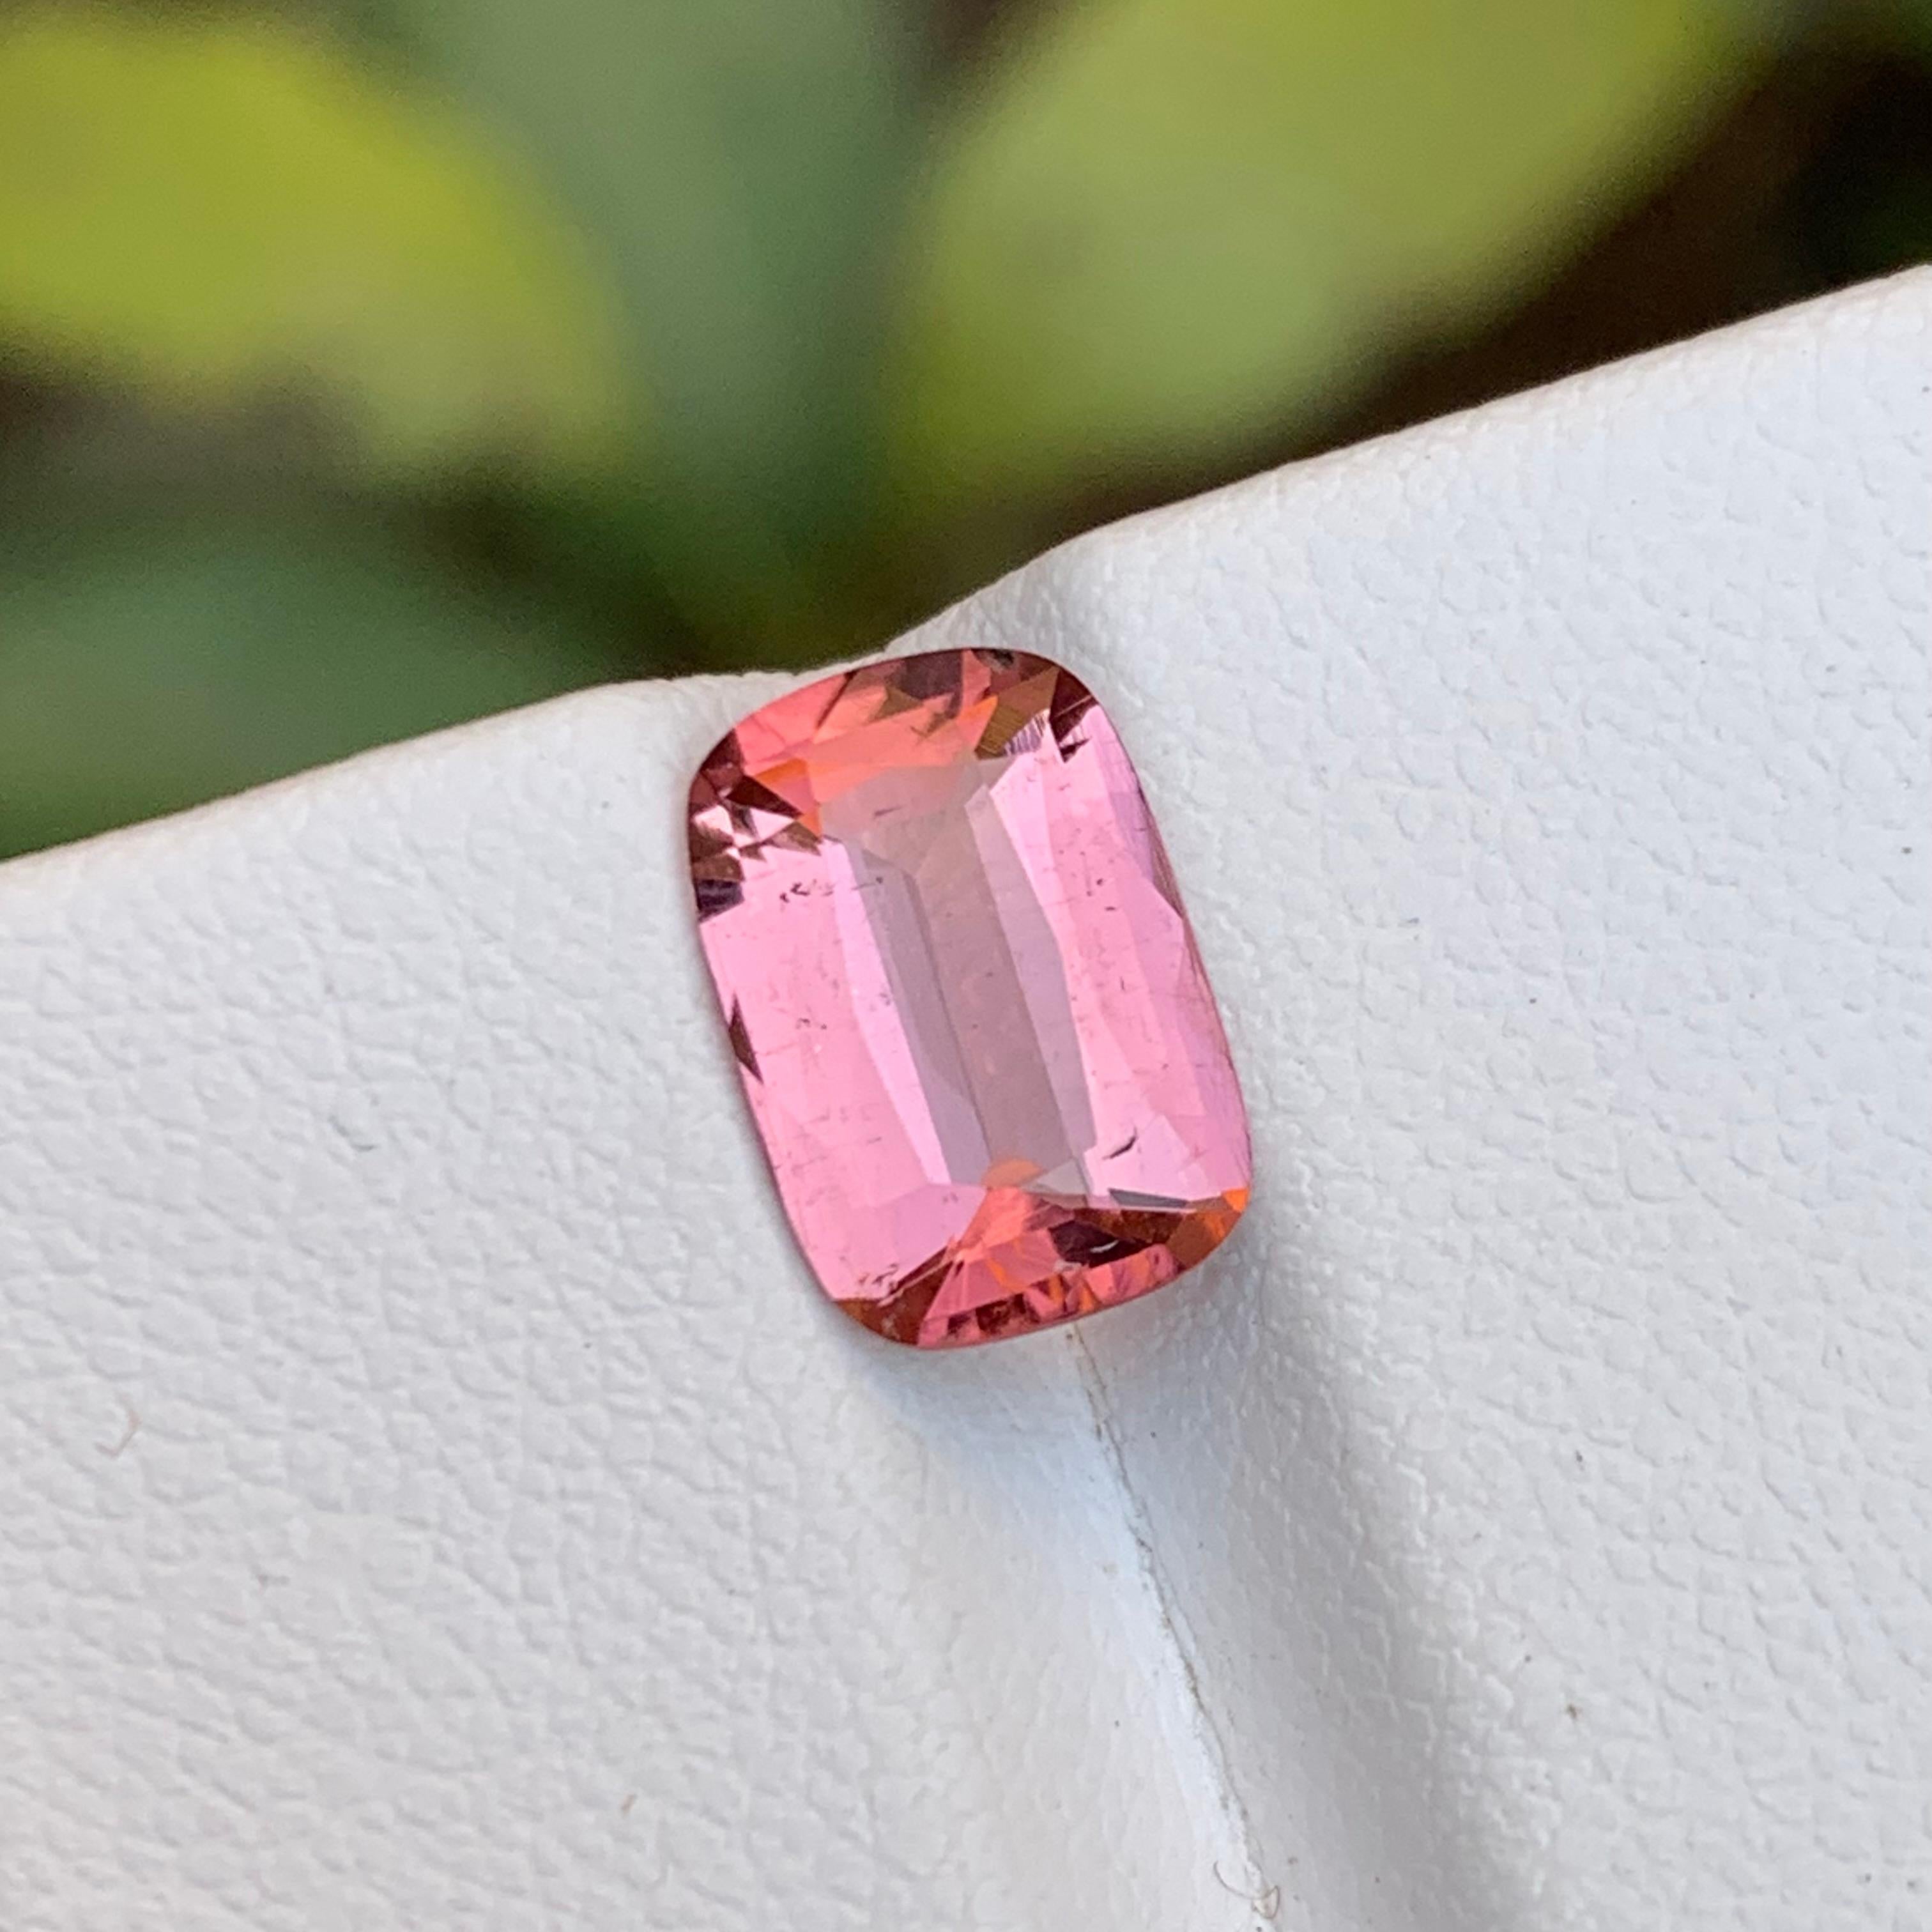 Rare Pink Natural Tourmaline Loose Gemstone, 2.30 Ct Cushion Cut Ideal for Ring For Sale 8